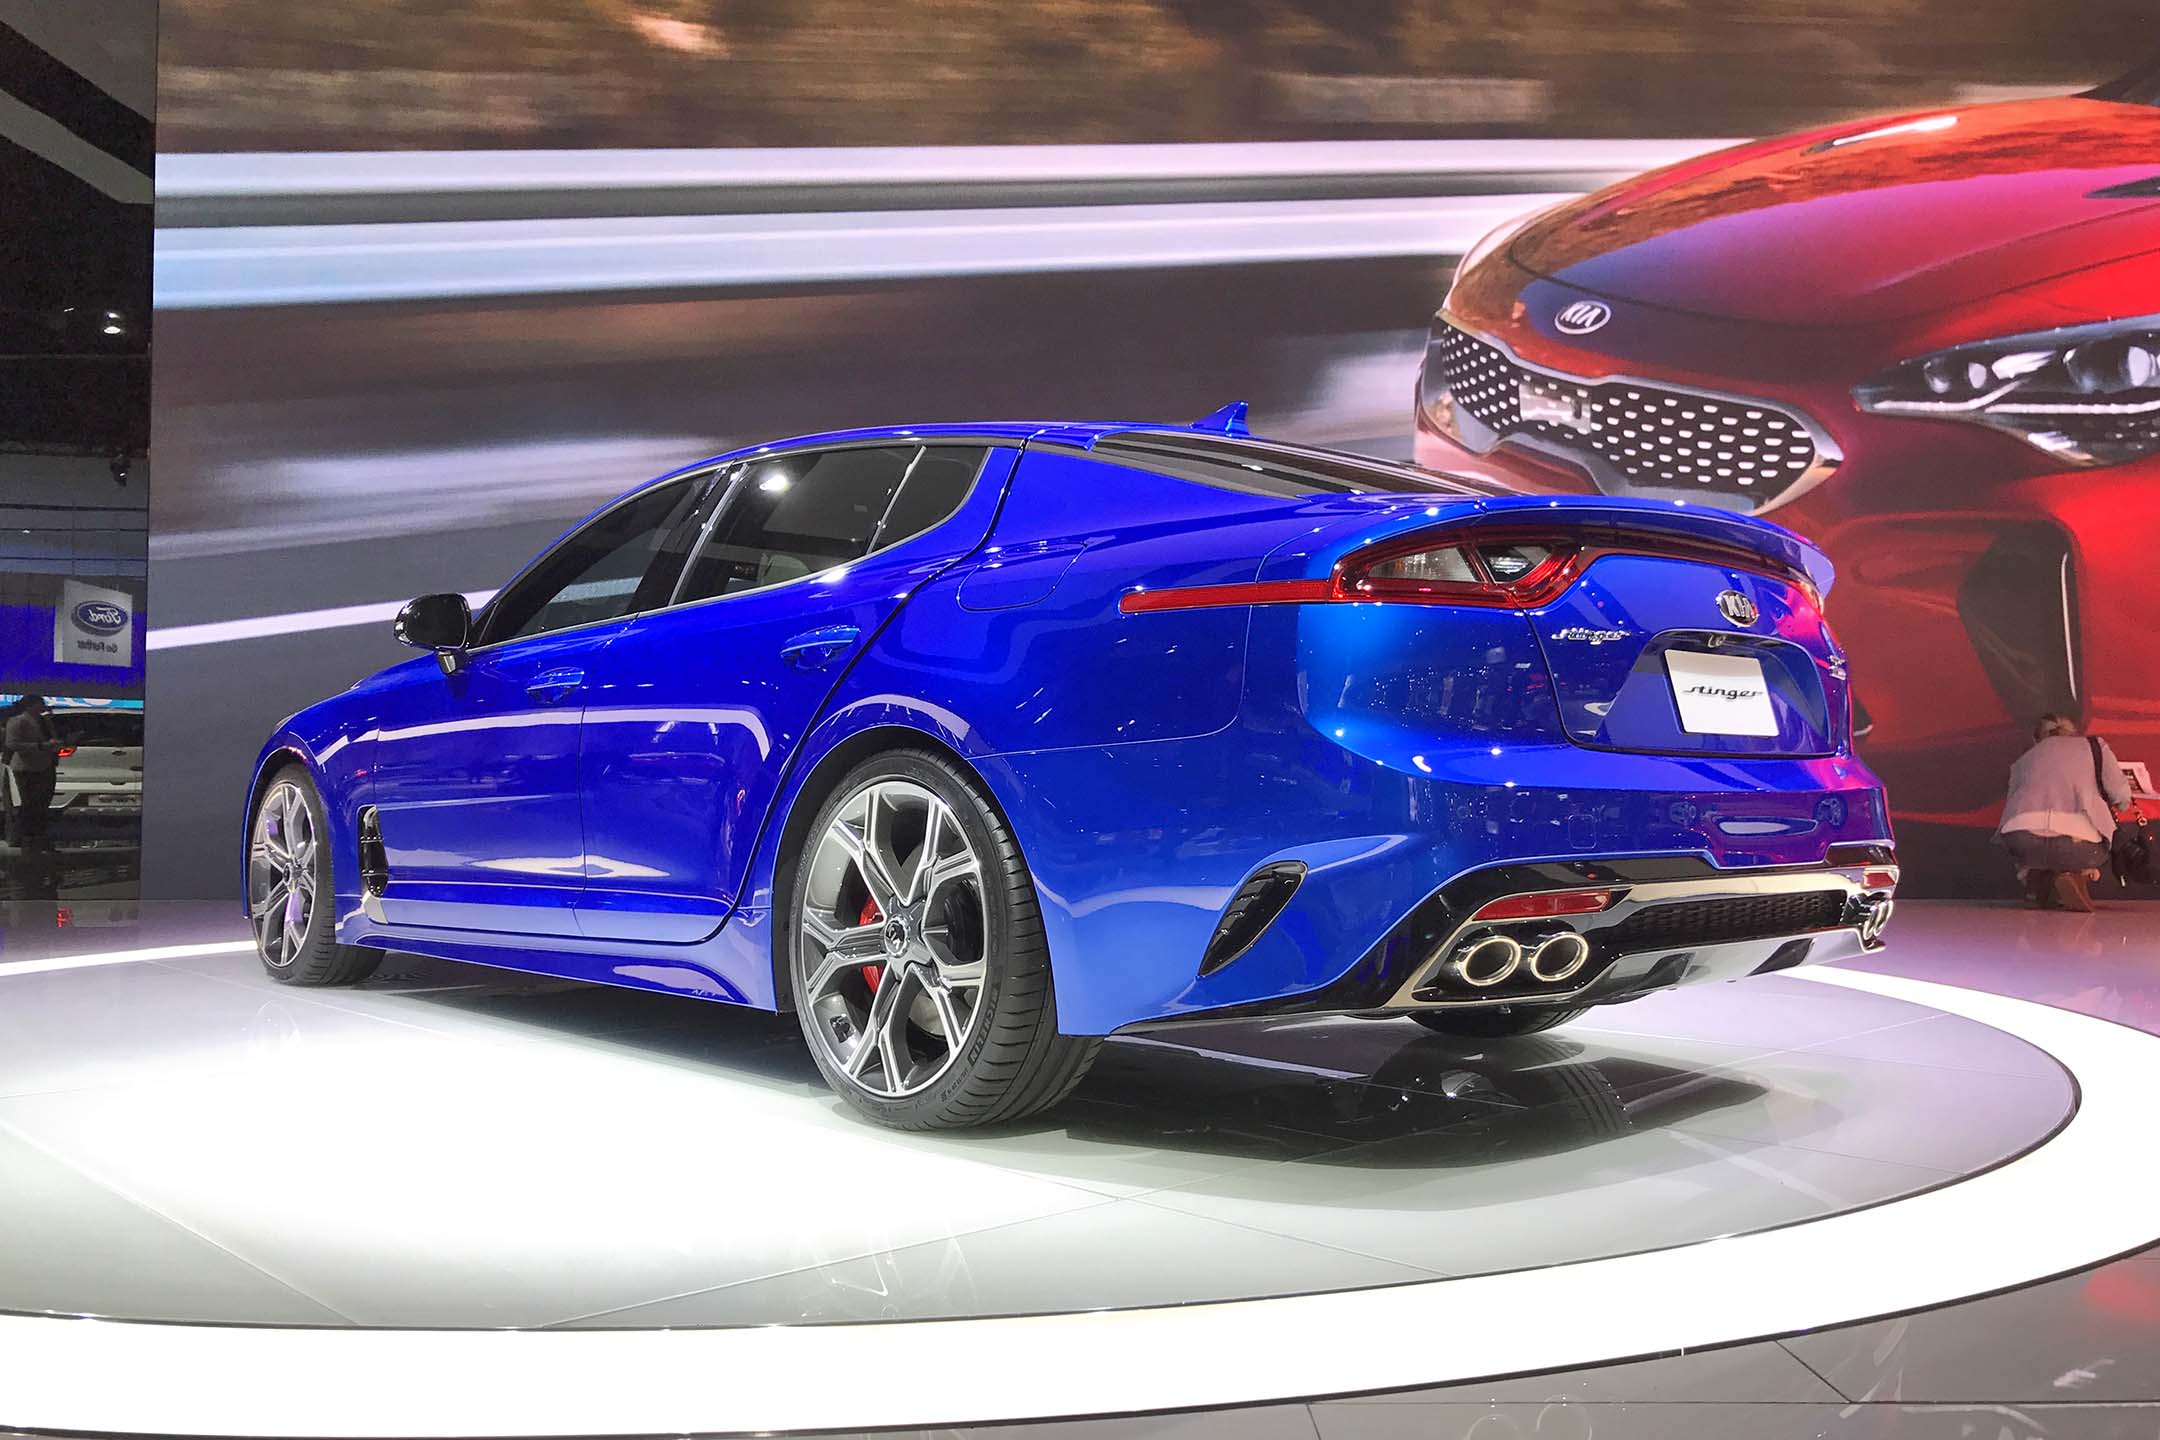 BH: See: Kia Stinger. It’s here, it’s real, and it’s about to start taking names.